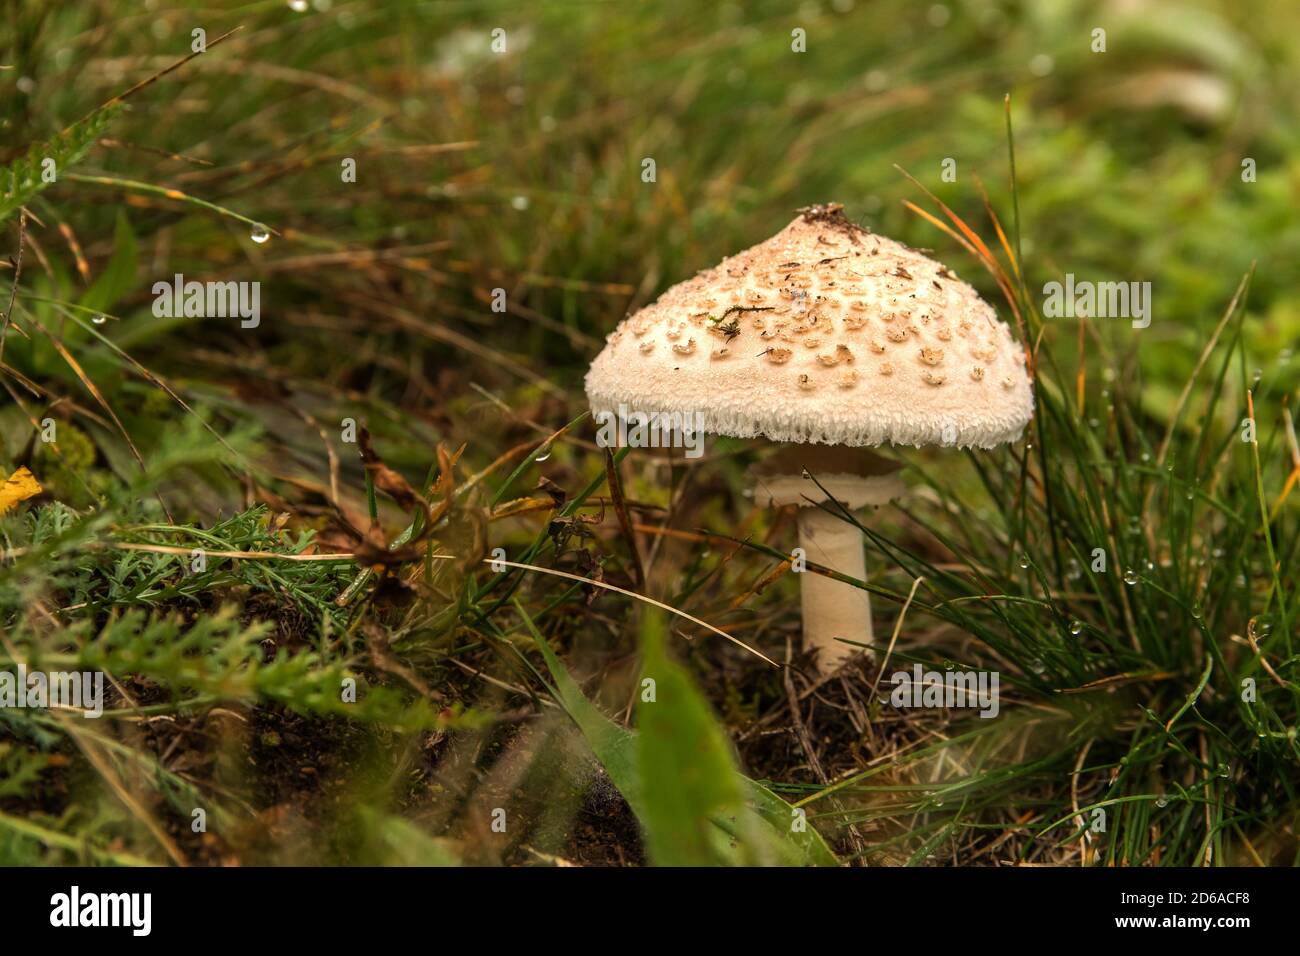 Shaggy Parasol Mushroom in a Meadow, Chlorophyllum rhacodes. Mushrooms in the grass in the meadow after the rain. Water drops on grass. Stock Photo